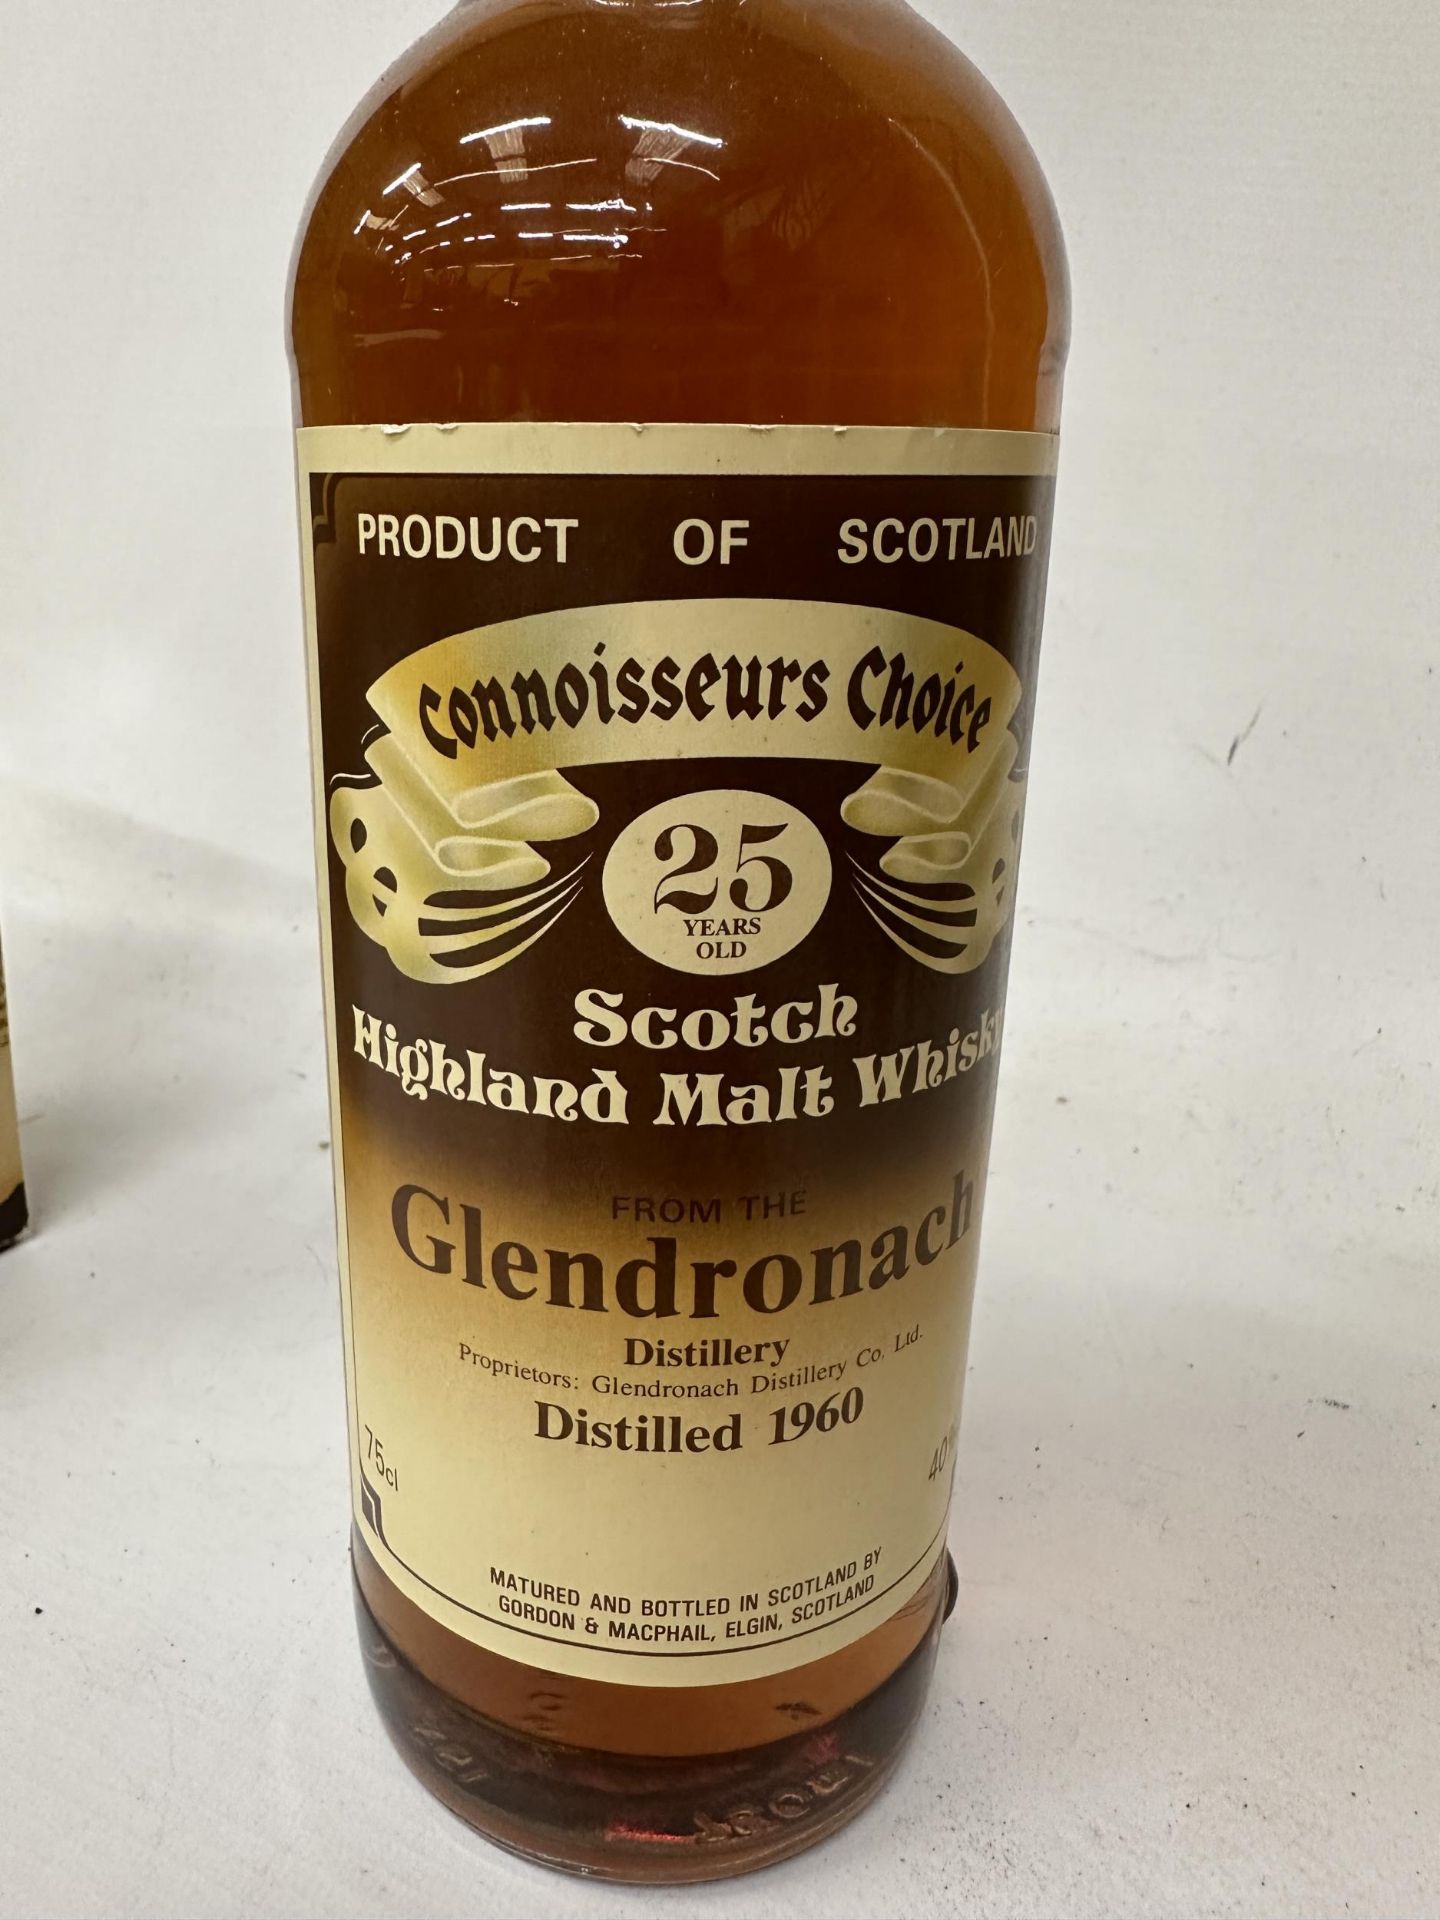 A BOXED 1960 BOTTLE OF GORDON & MACPHAIL CONNOISSEURS CHOICE 25 YEAR OLD SCOTCH HIGHLAND MALT WHISKY - Image 2 of 5